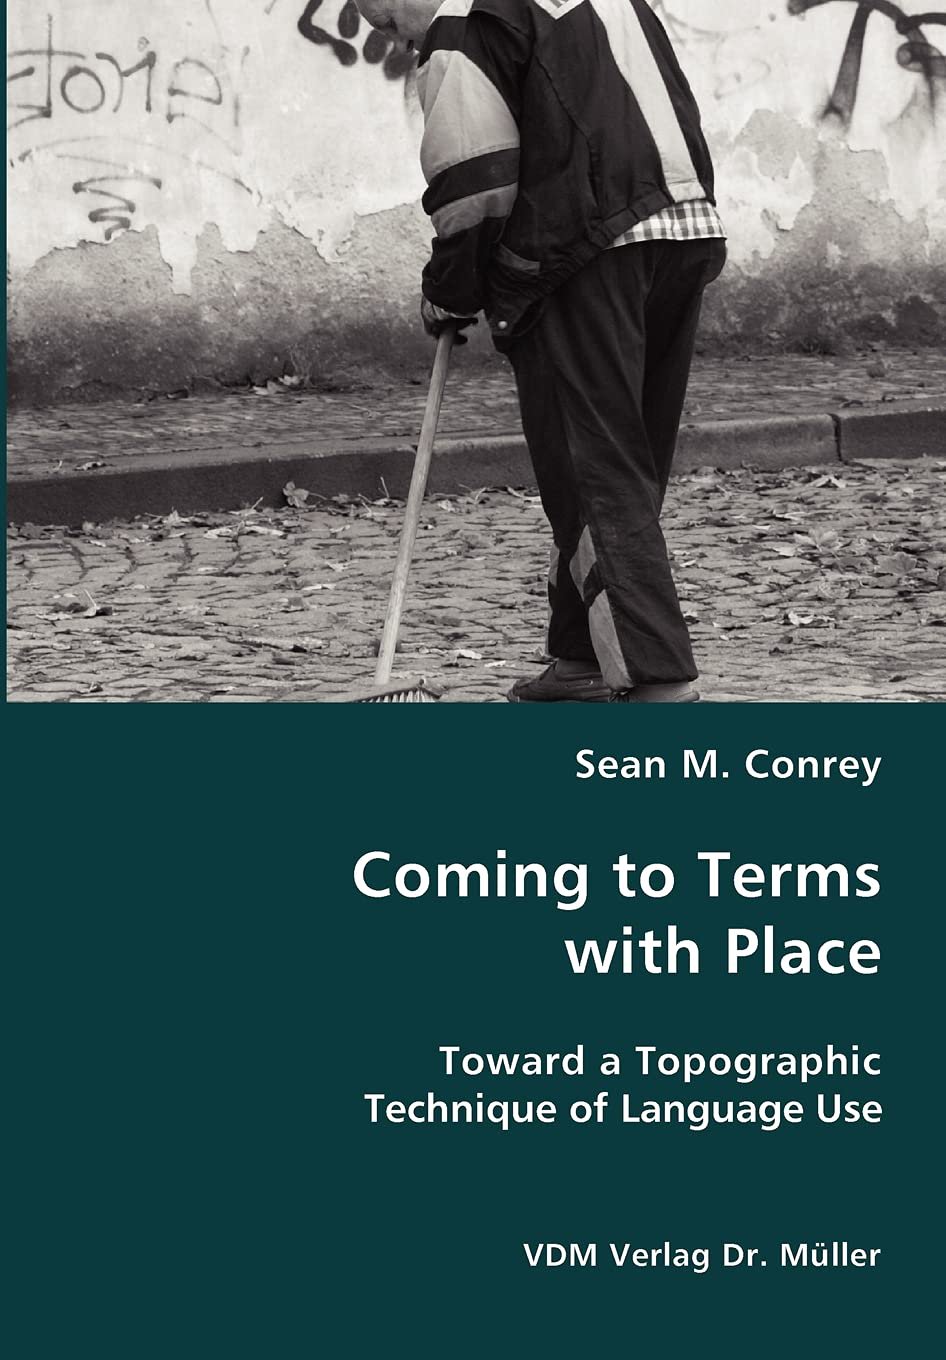 Coming to Terms with Place: Toward a Topographic Technique of Language Use